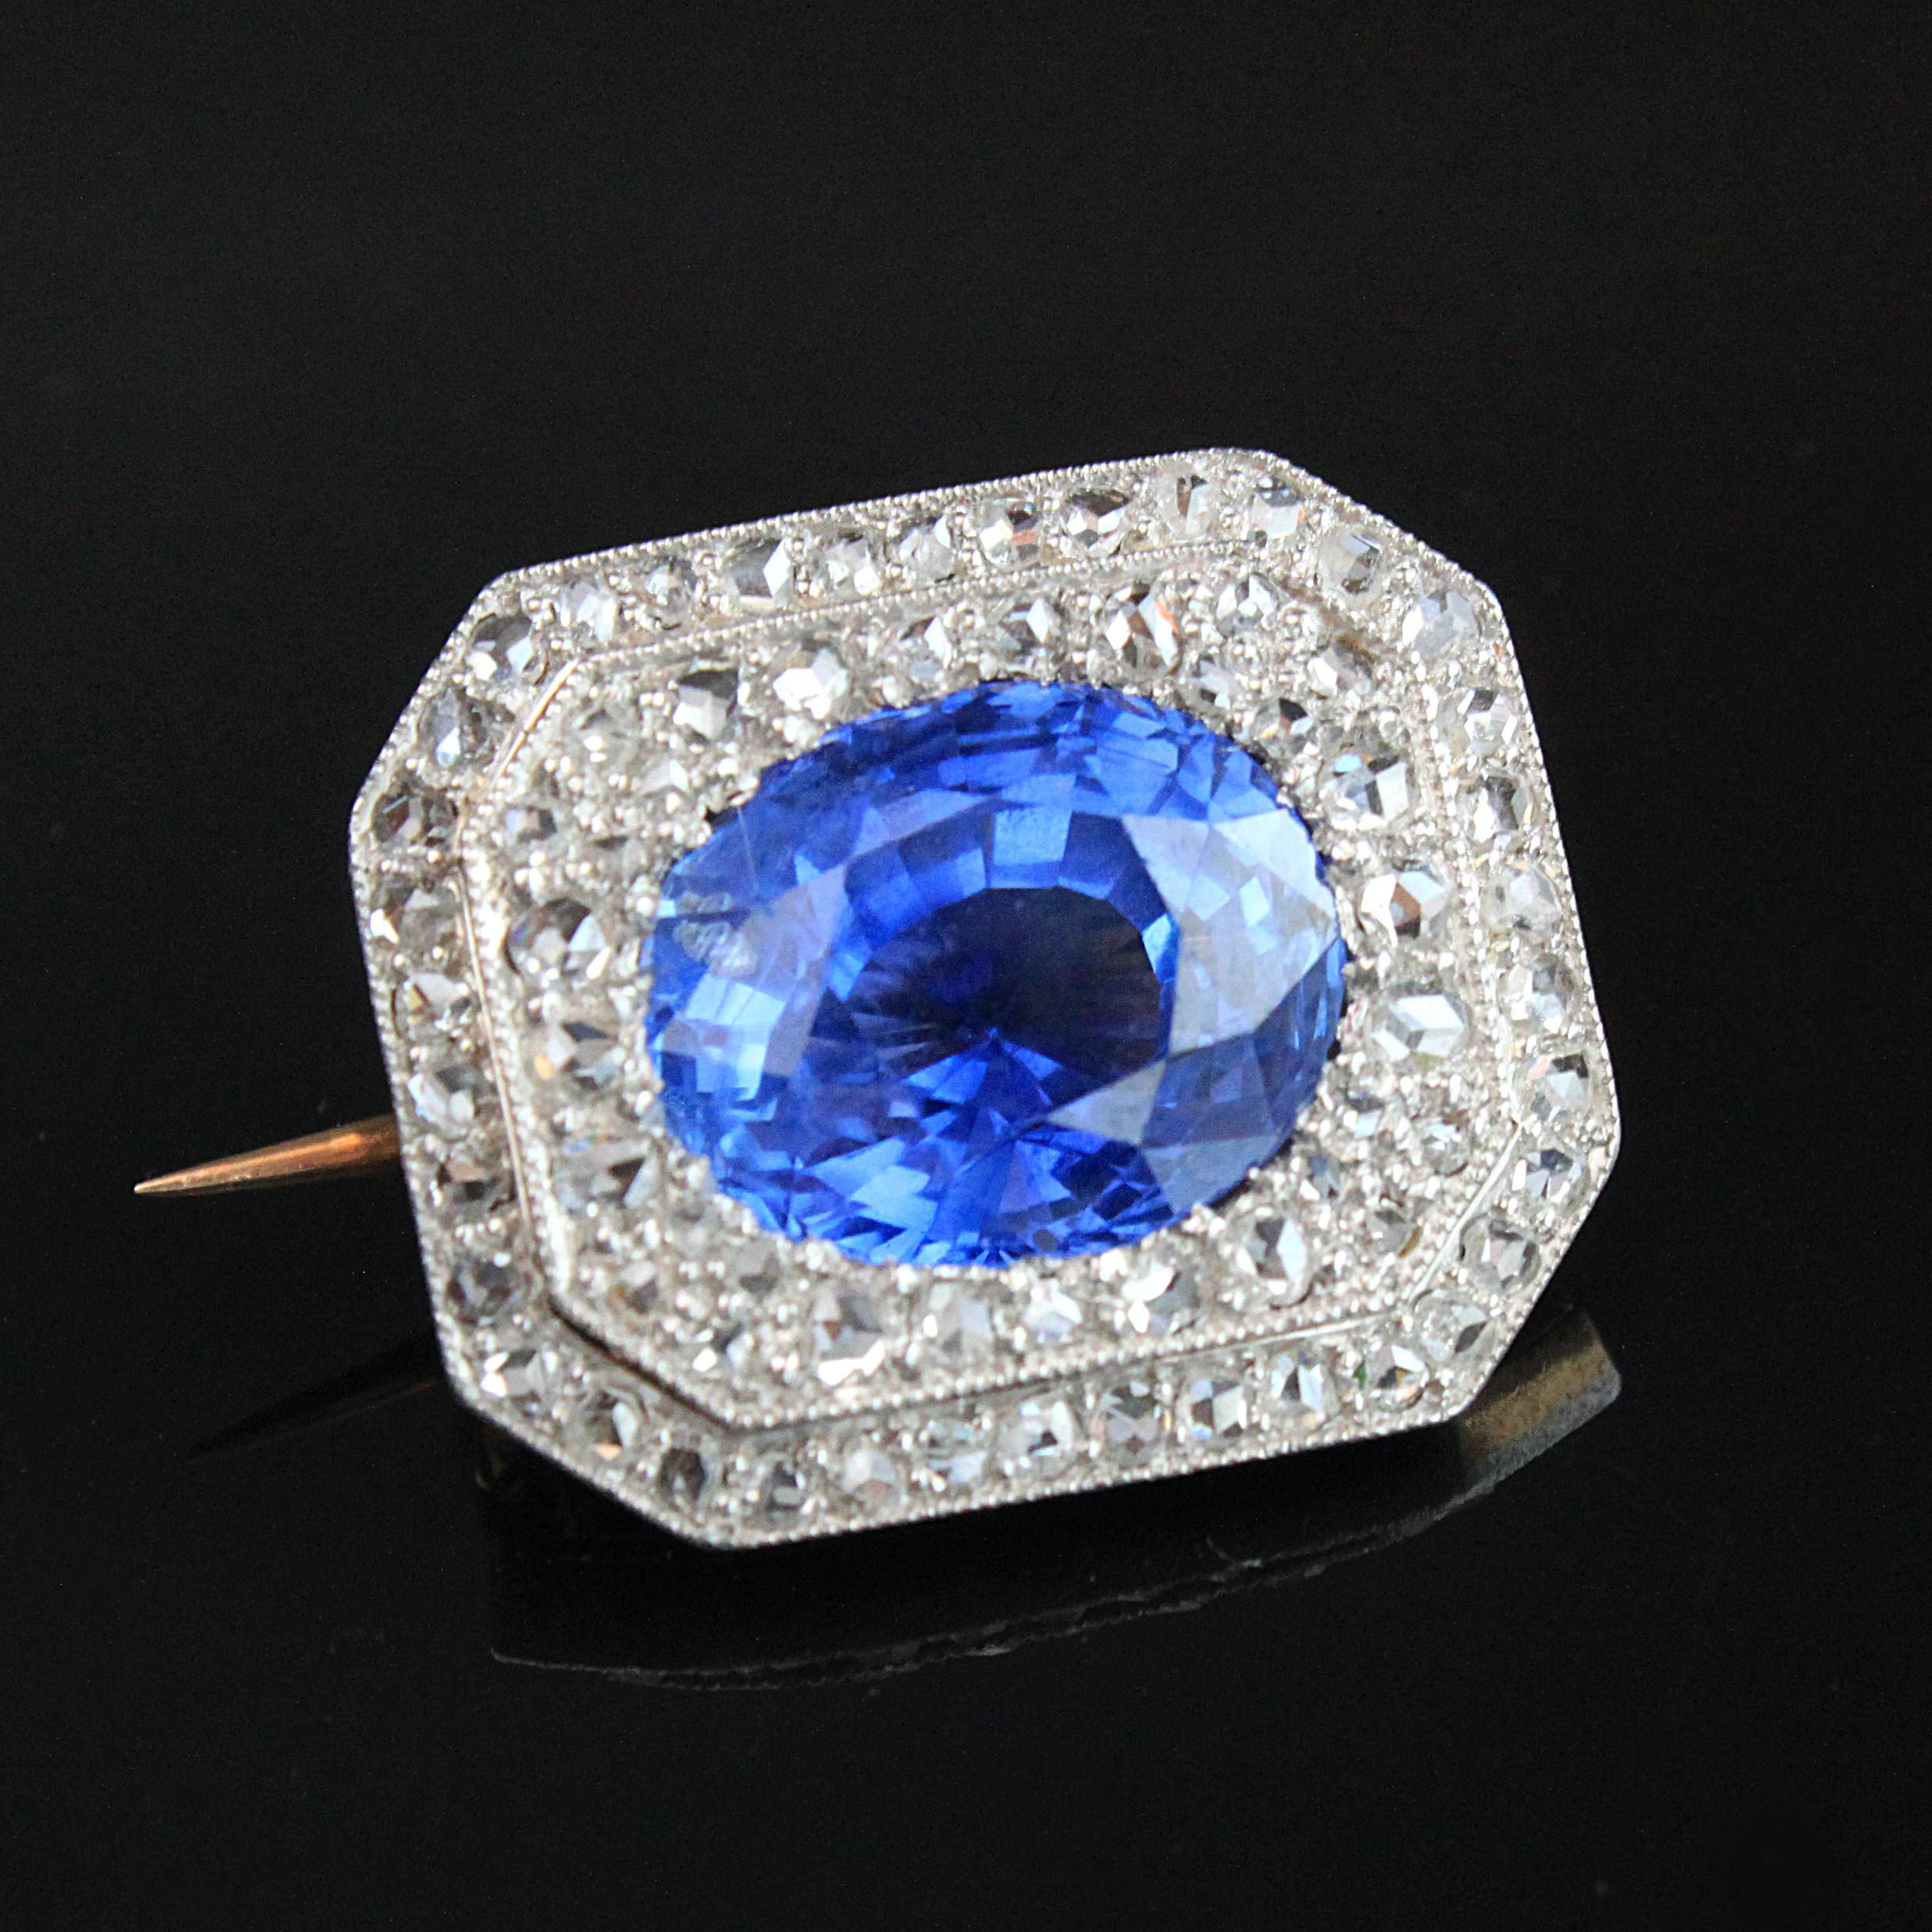 An Edwardian sapphire and diamond brooch in platinum and yellow gold, ca. 1910s. The central sapphire weighs approximately 9 carats and is a natural sapphire, not heated, and of Ceylon origin. It is surrounded by a double cluster of multiple rose